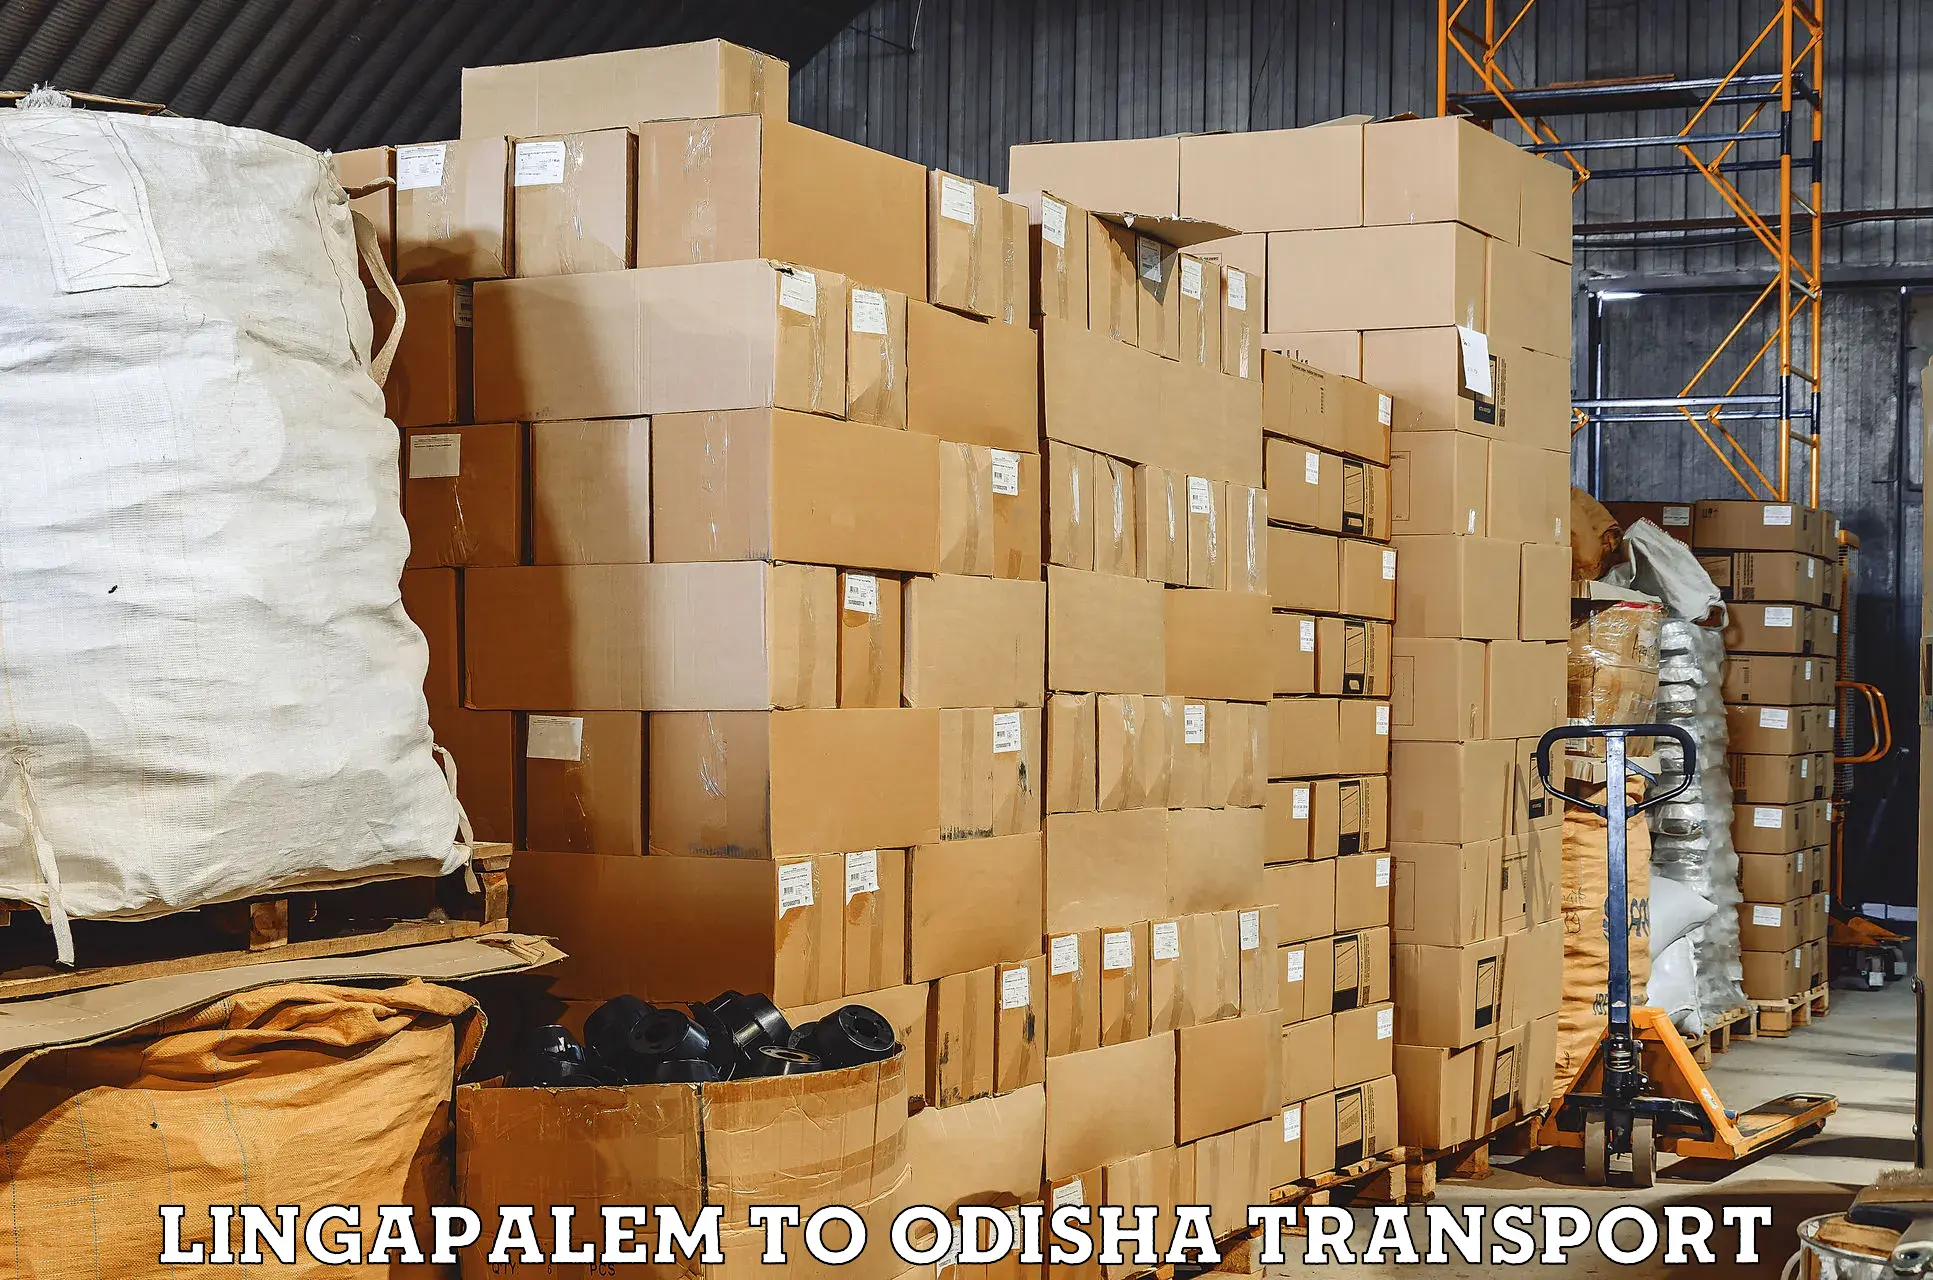 Air freight transport services Lingapalem to Paradip Port